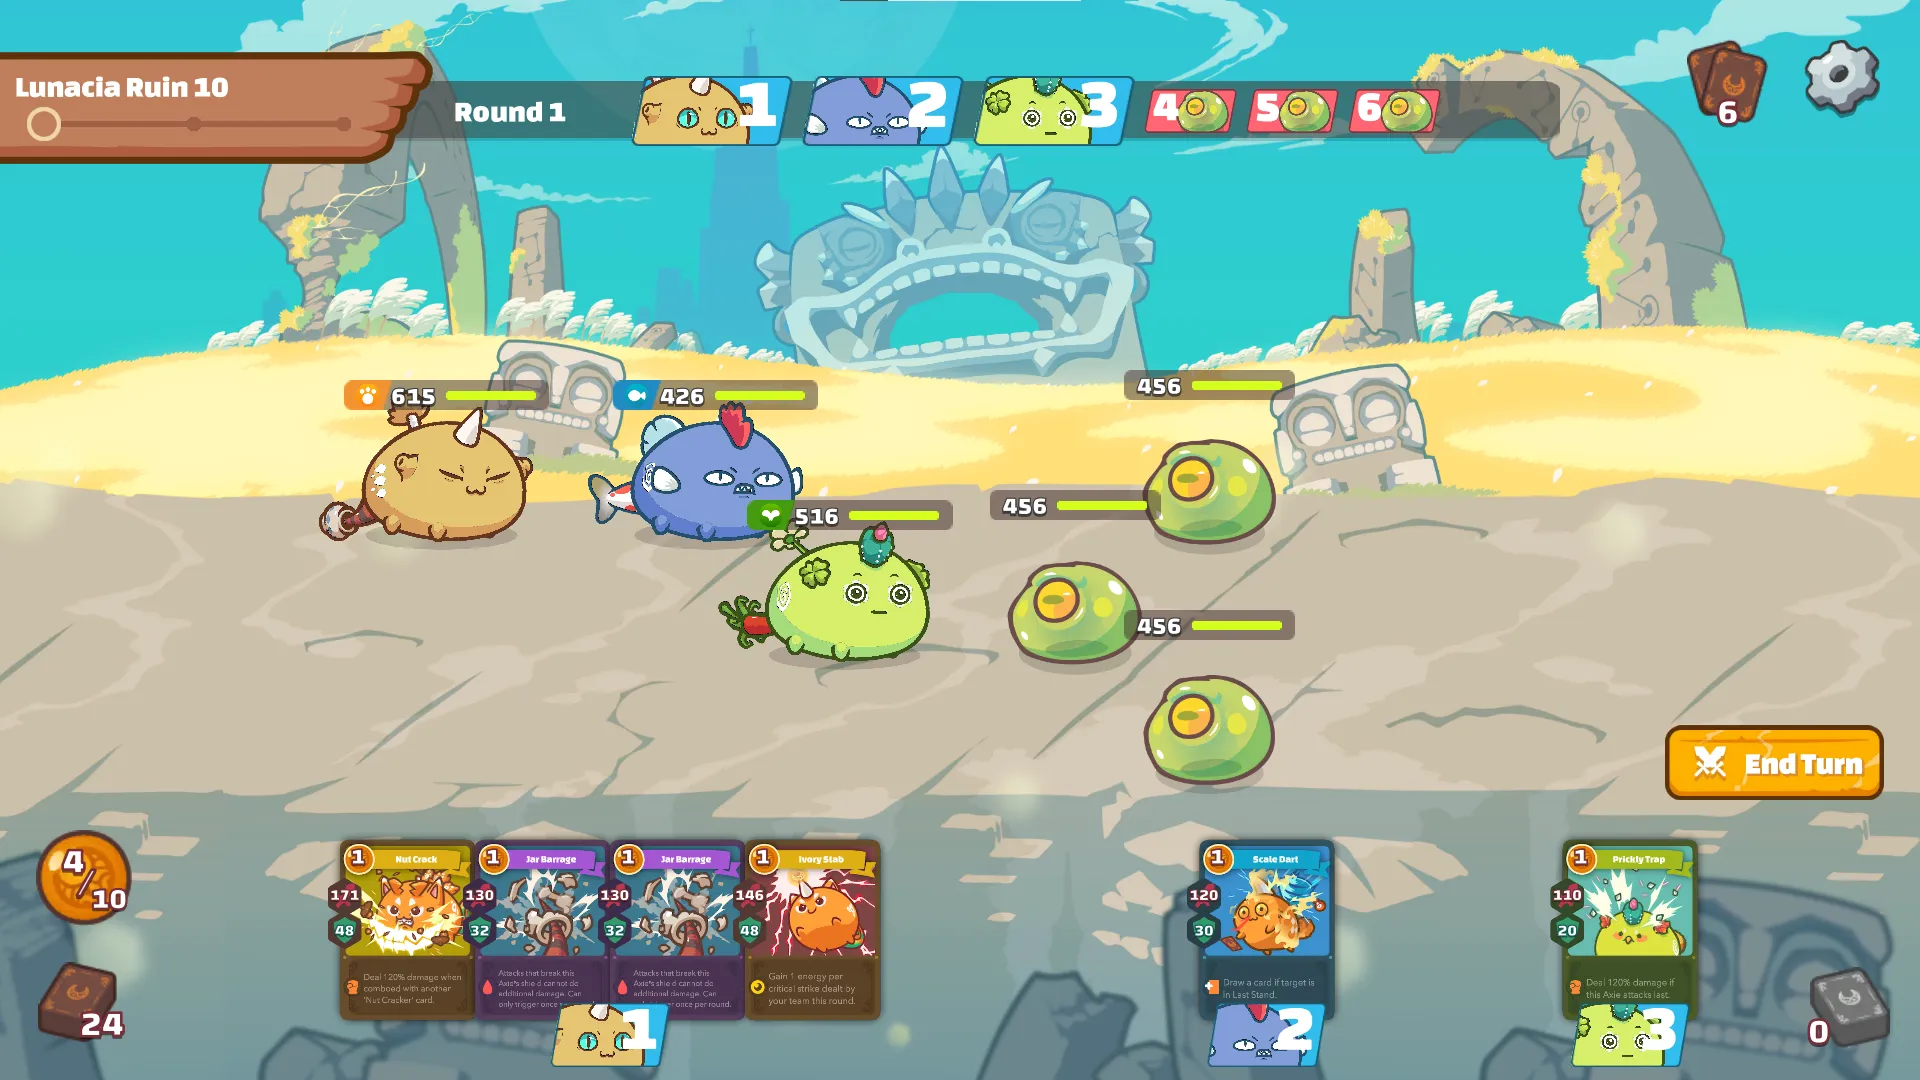 Axie Infinity Adventure mode is where players fight against monsters to level up their Axies. Players must defeat these monsters to progress in the game mode.